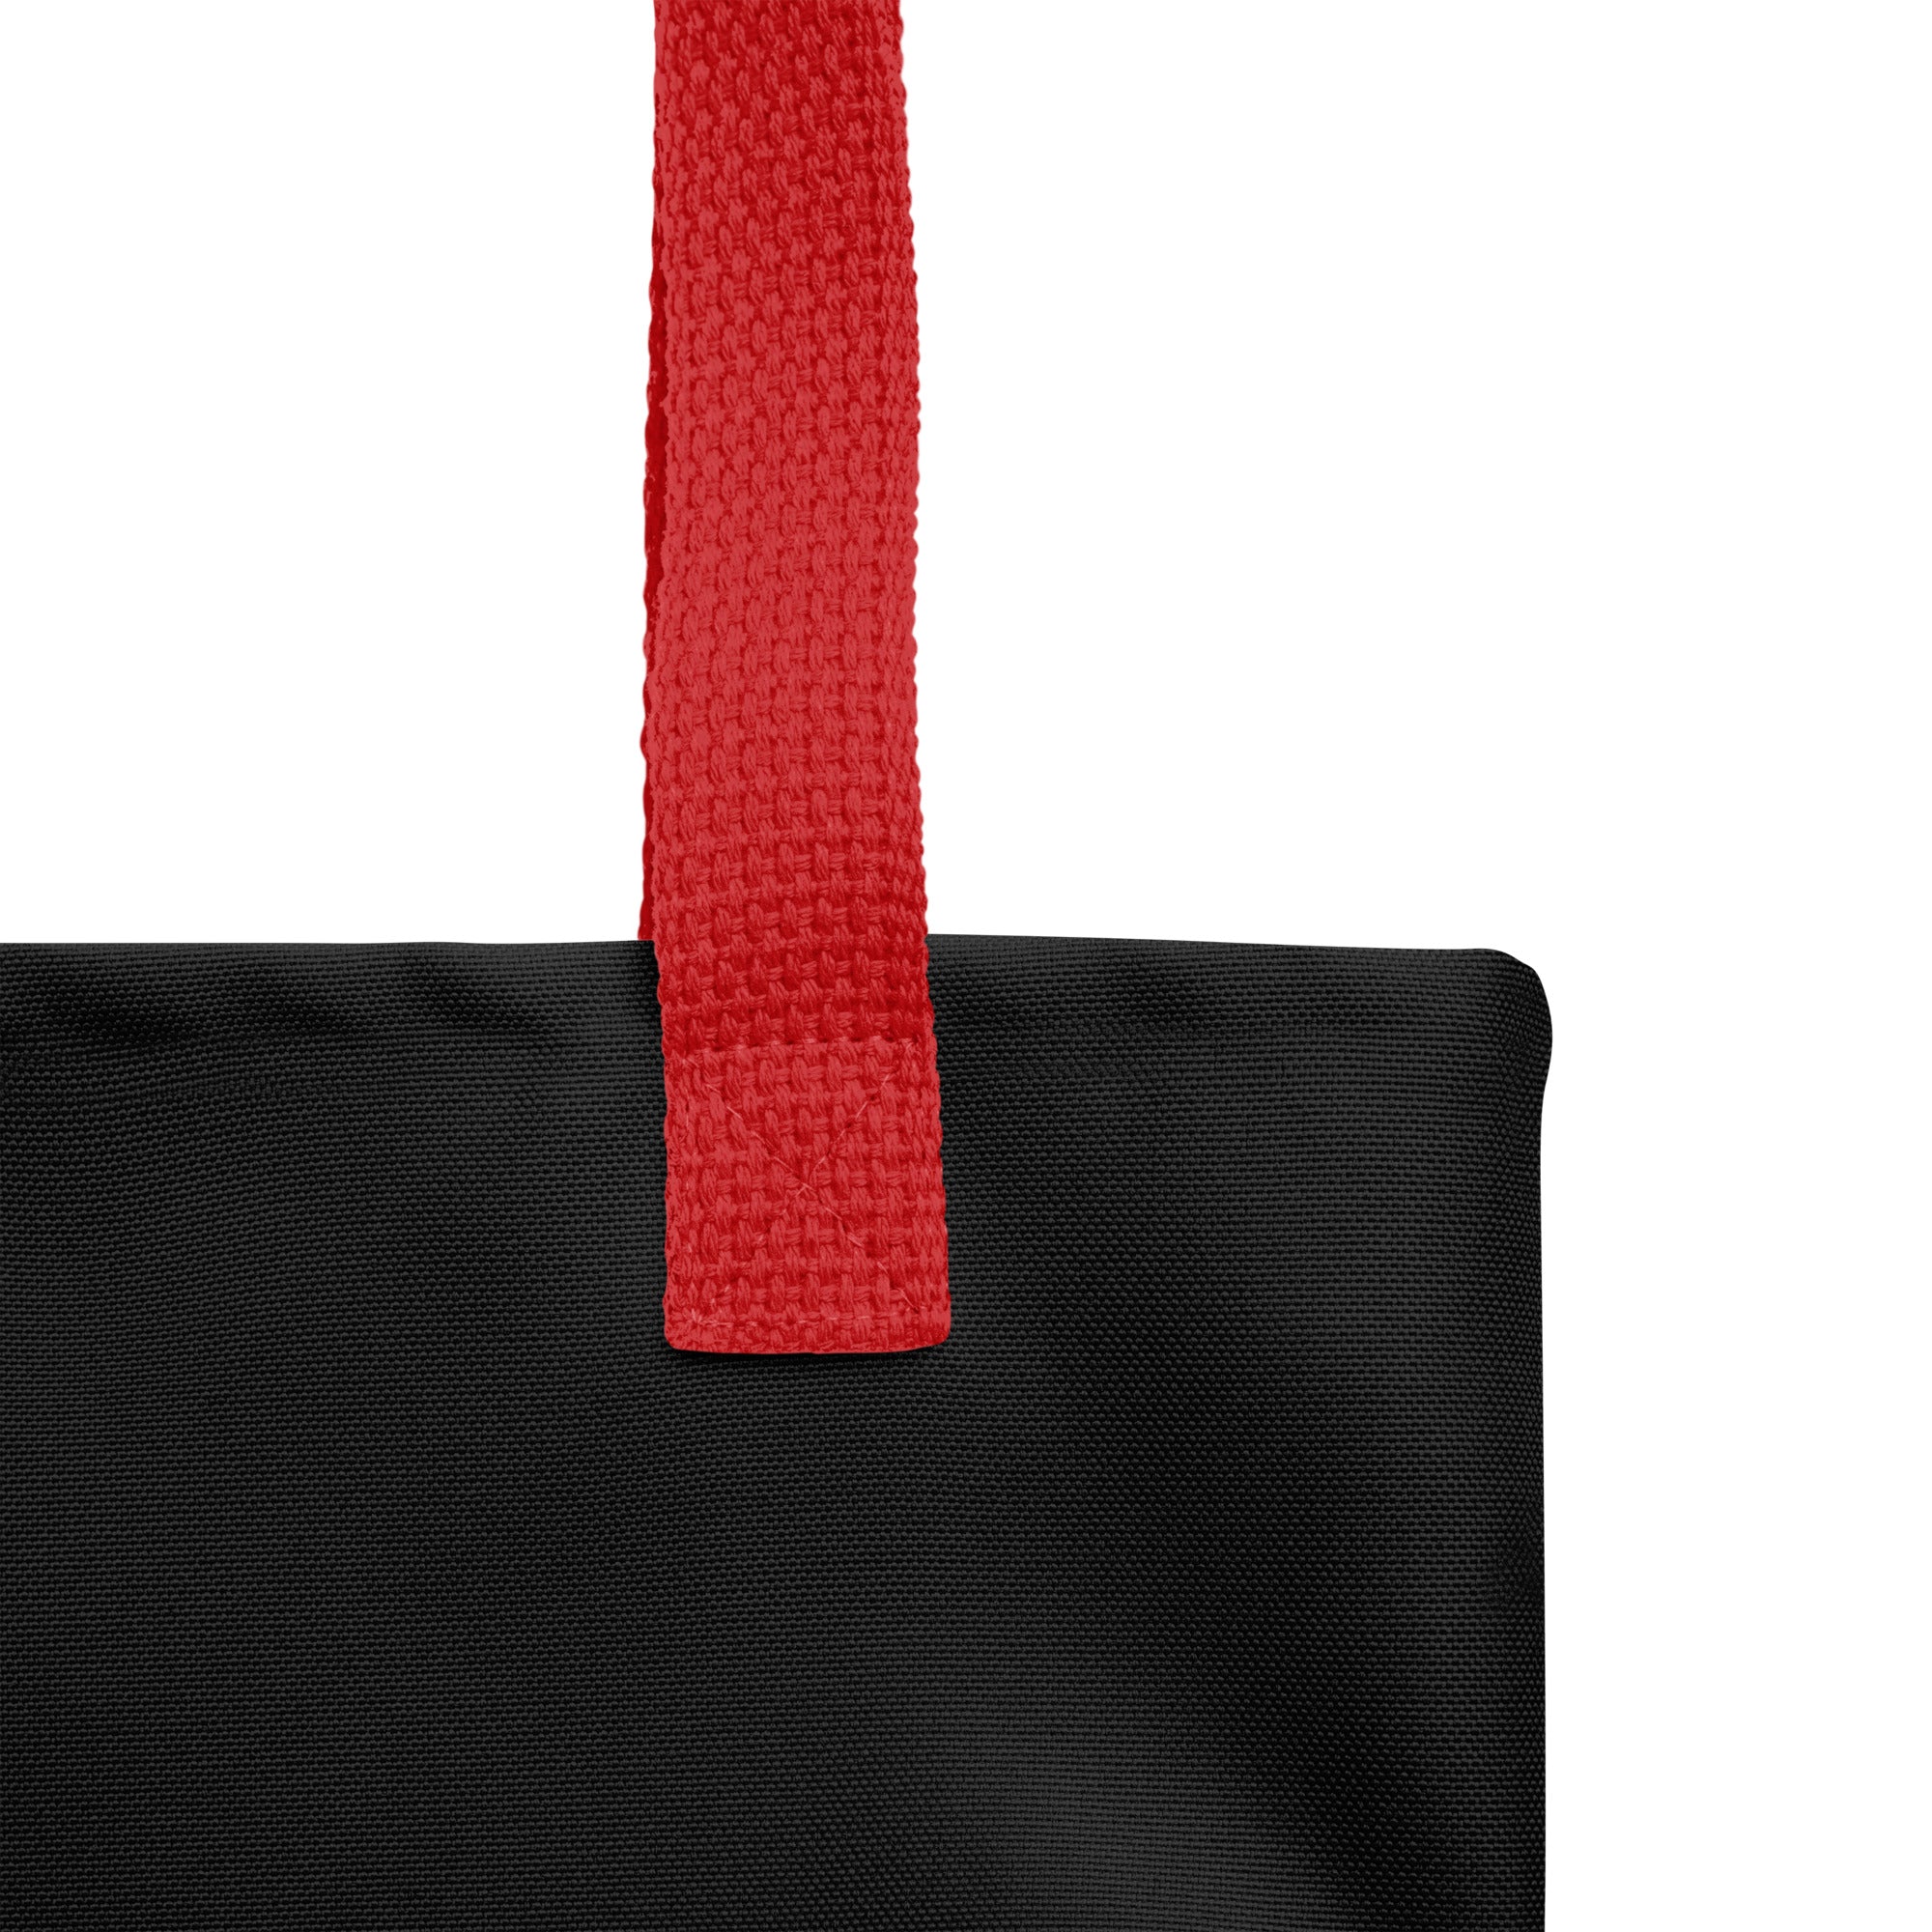  Ivorie Couture Signature Noir Luxury Carry-All Tote Bag 